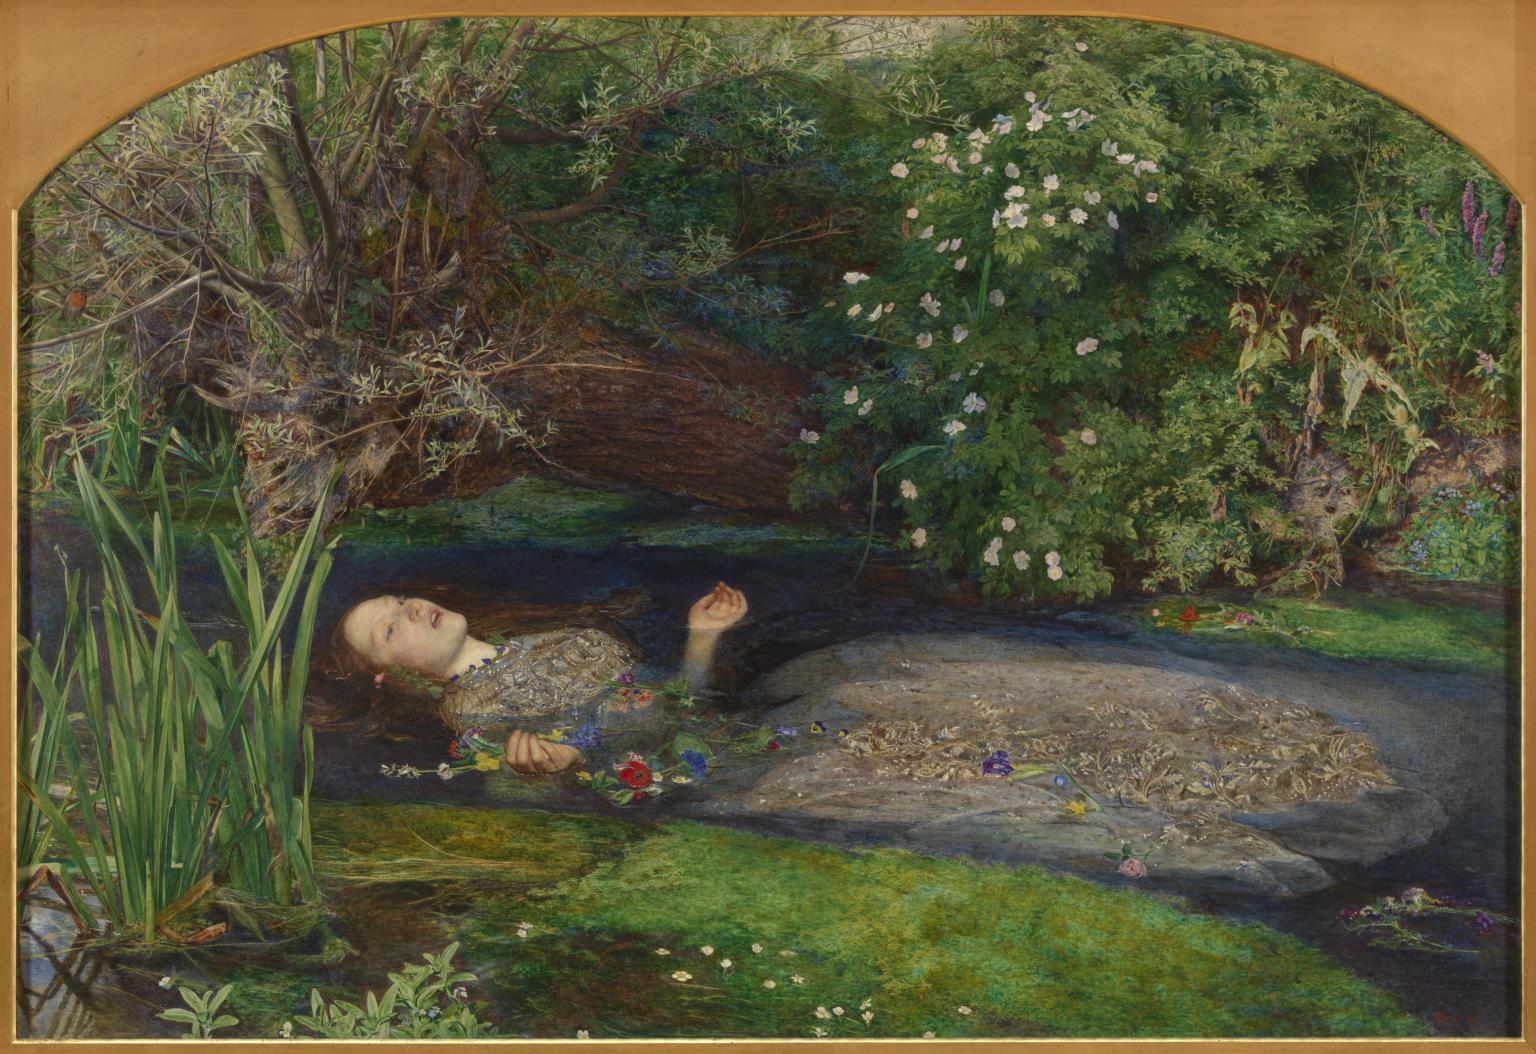 A painting depicting Shakespeare's 'Ophelia' who lay in a lake after dying, surrounded by green vegetation